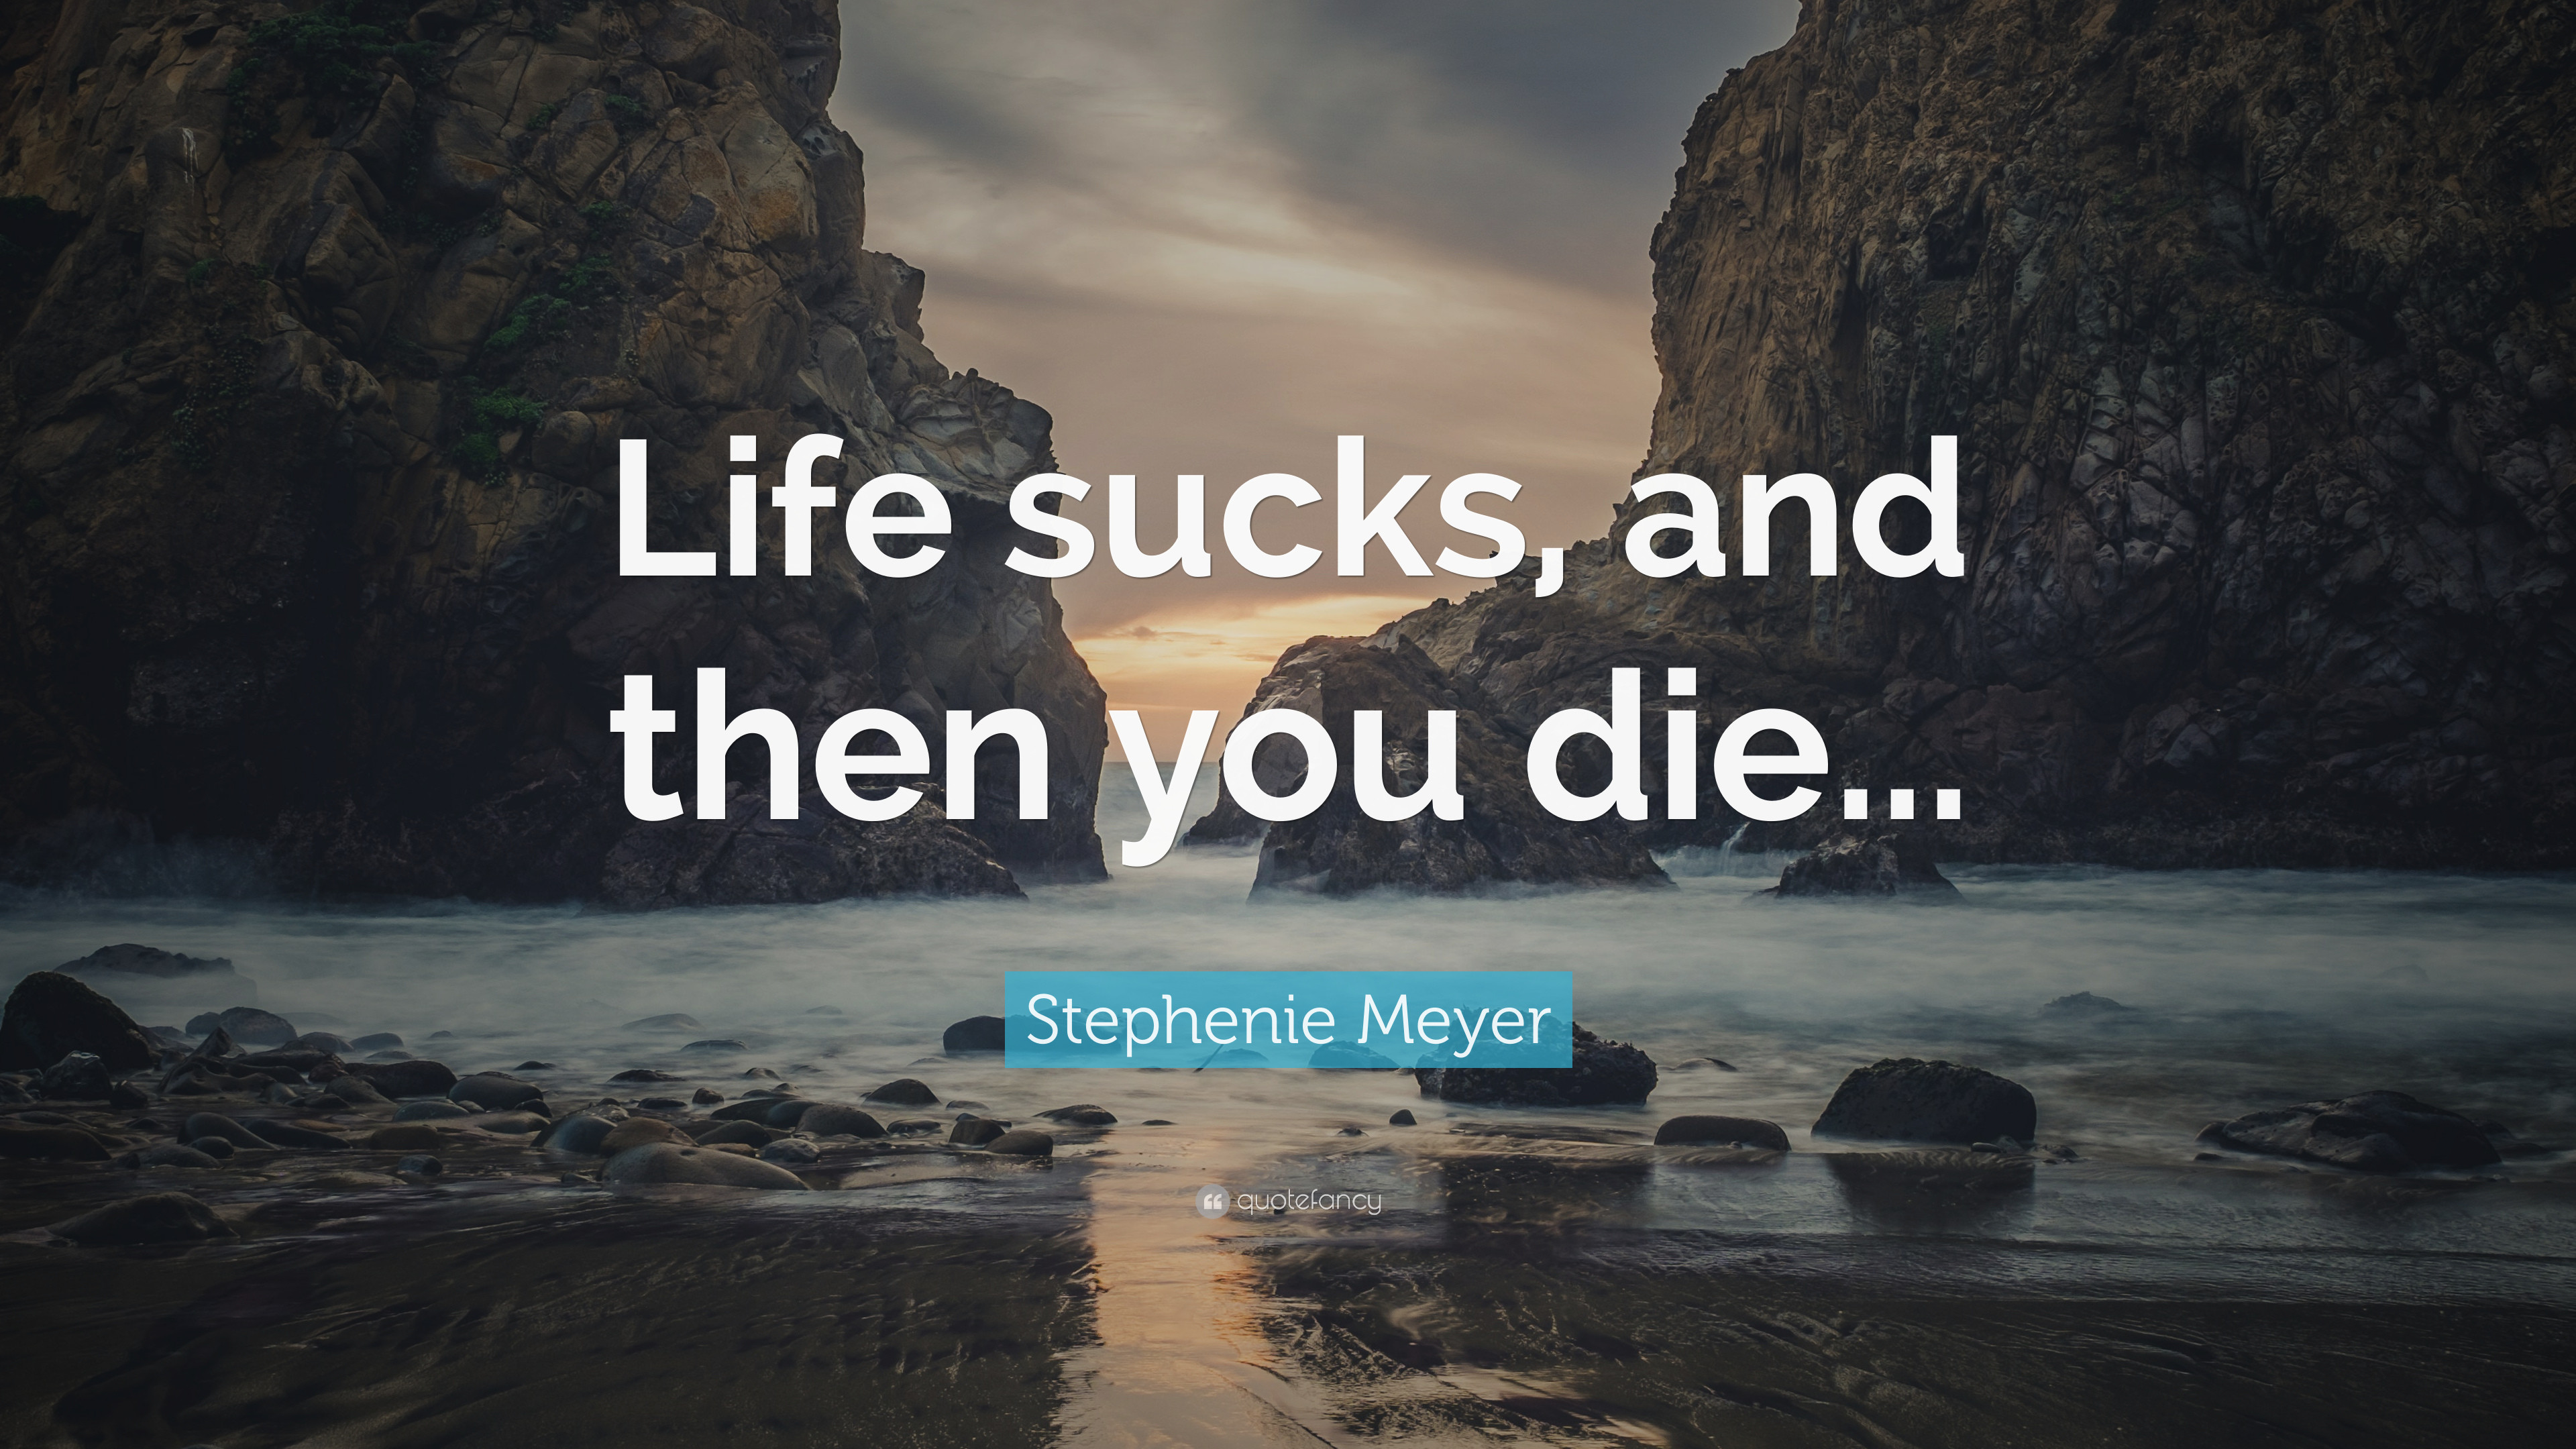 3840x2160 Stephenie Meyer Quote: "Life sucks, and then you die. 